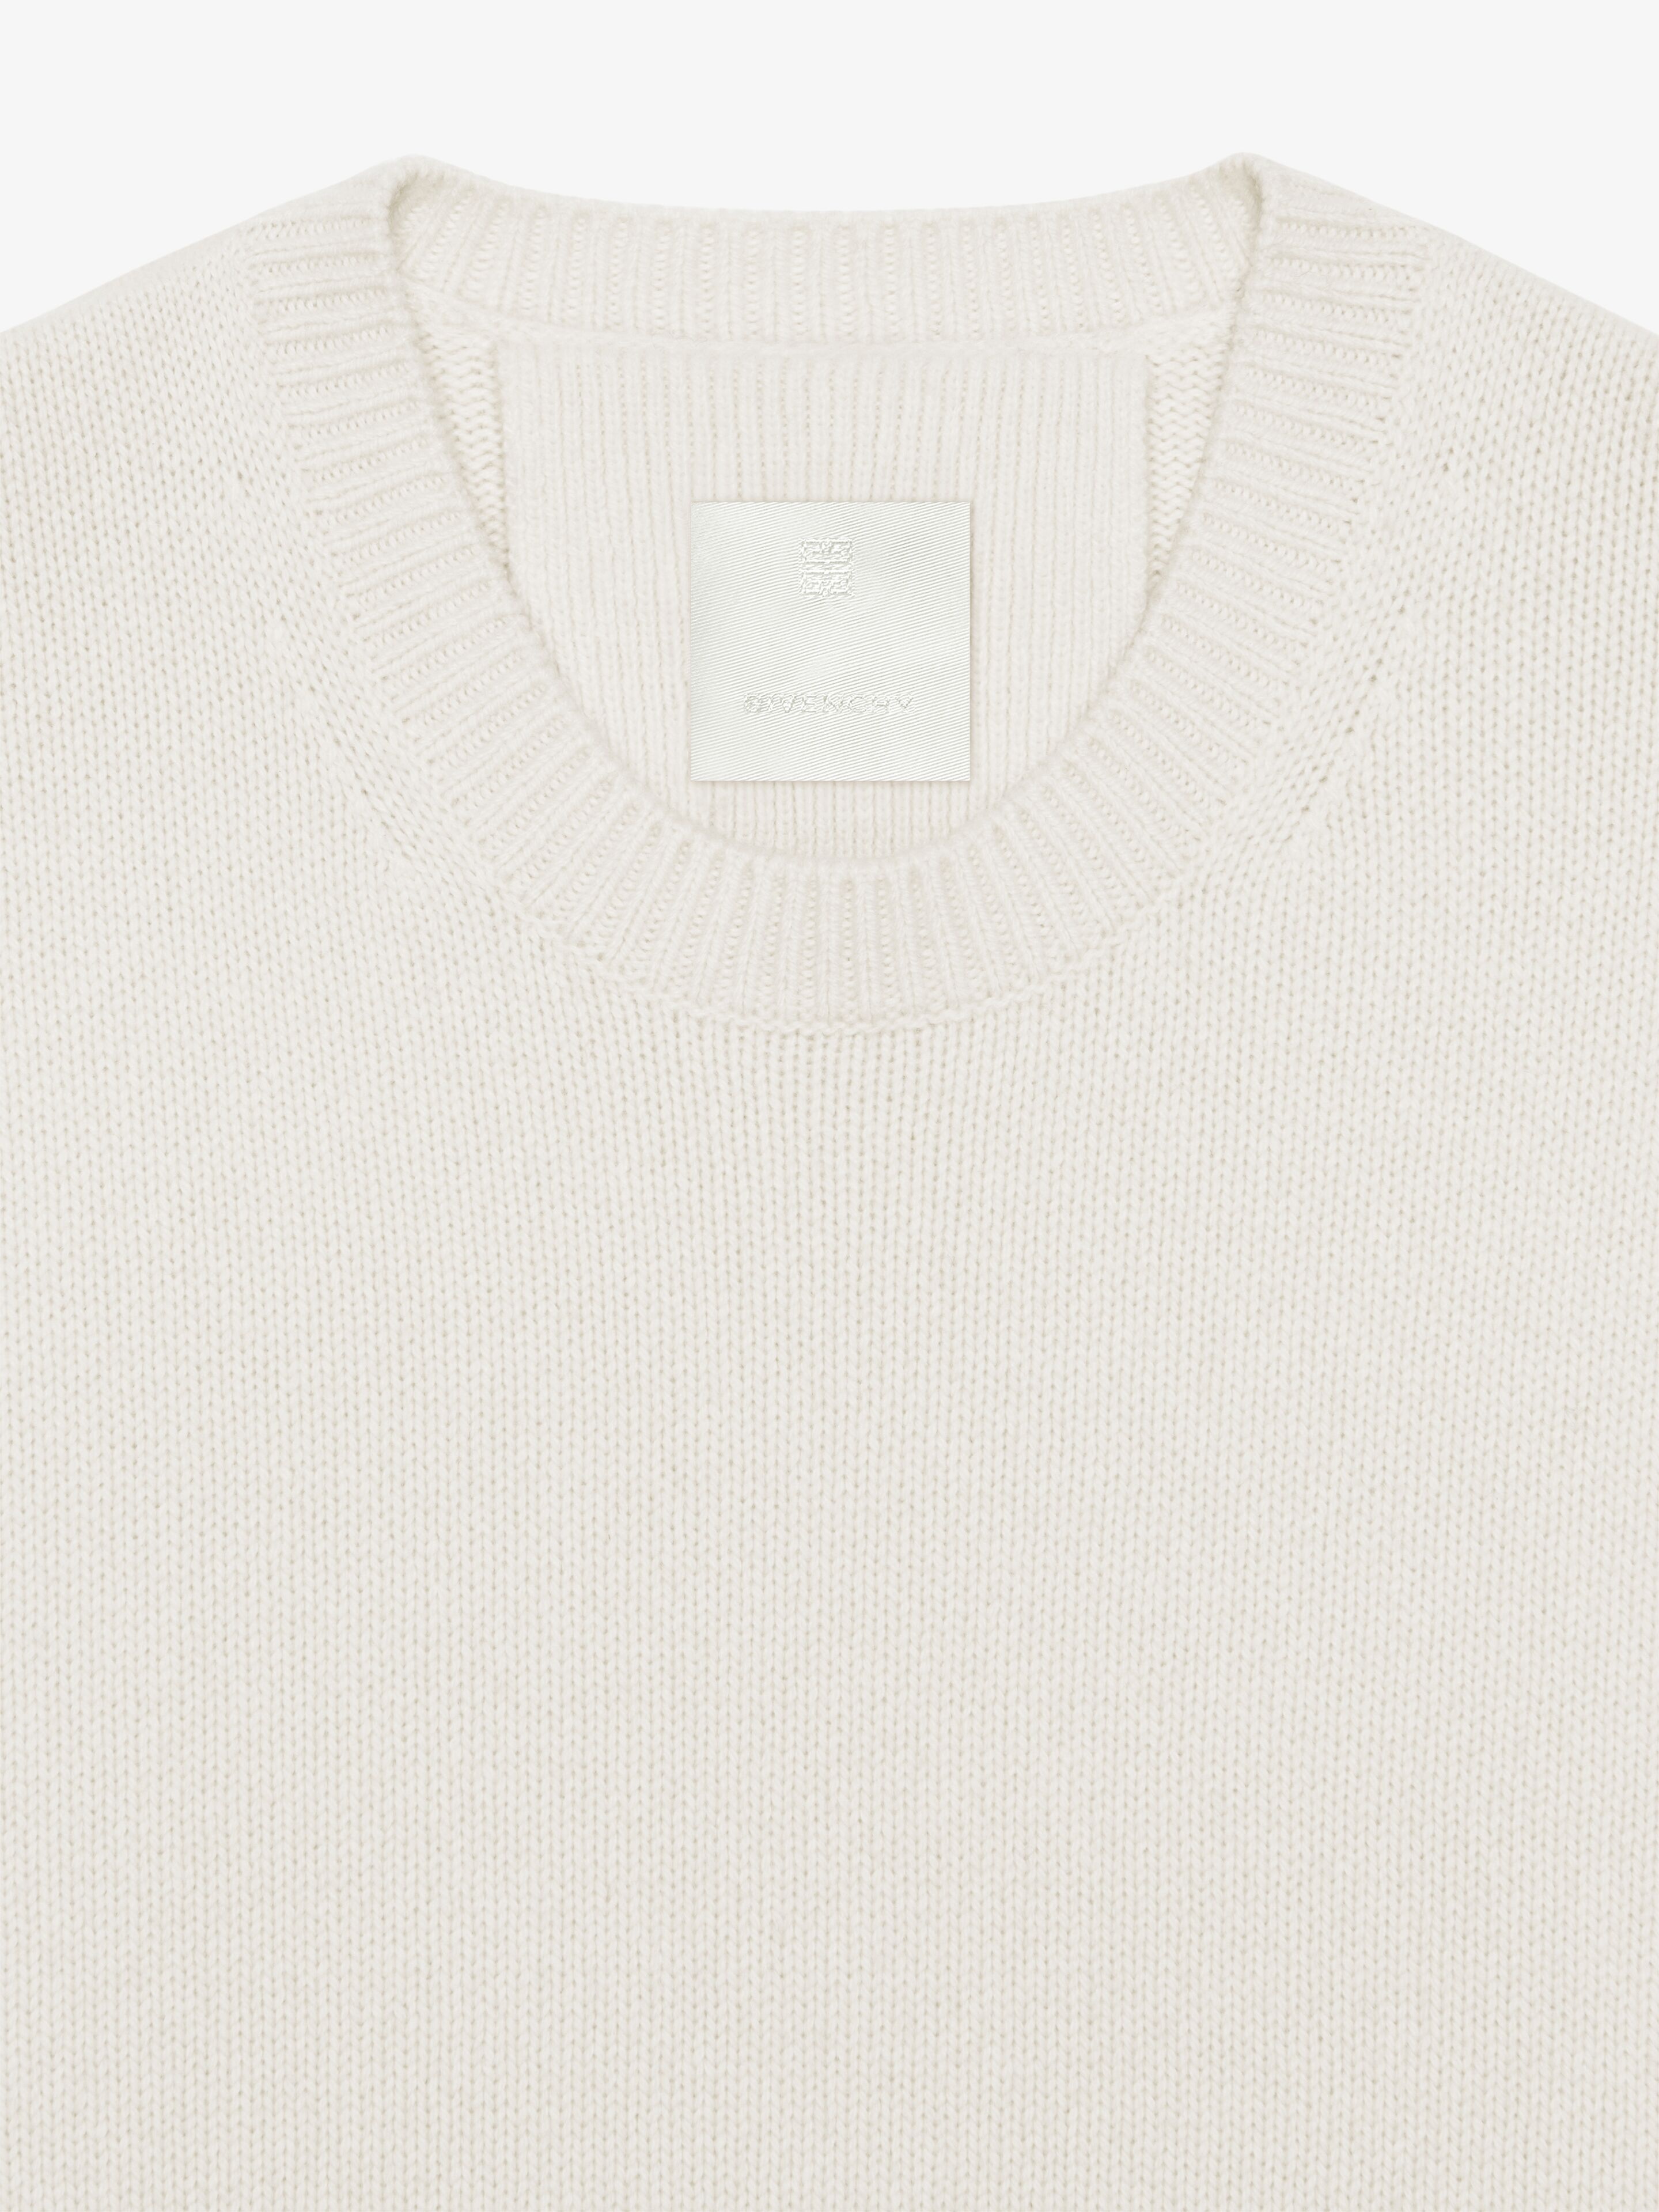 SWEATER IN CASHMERE - 5